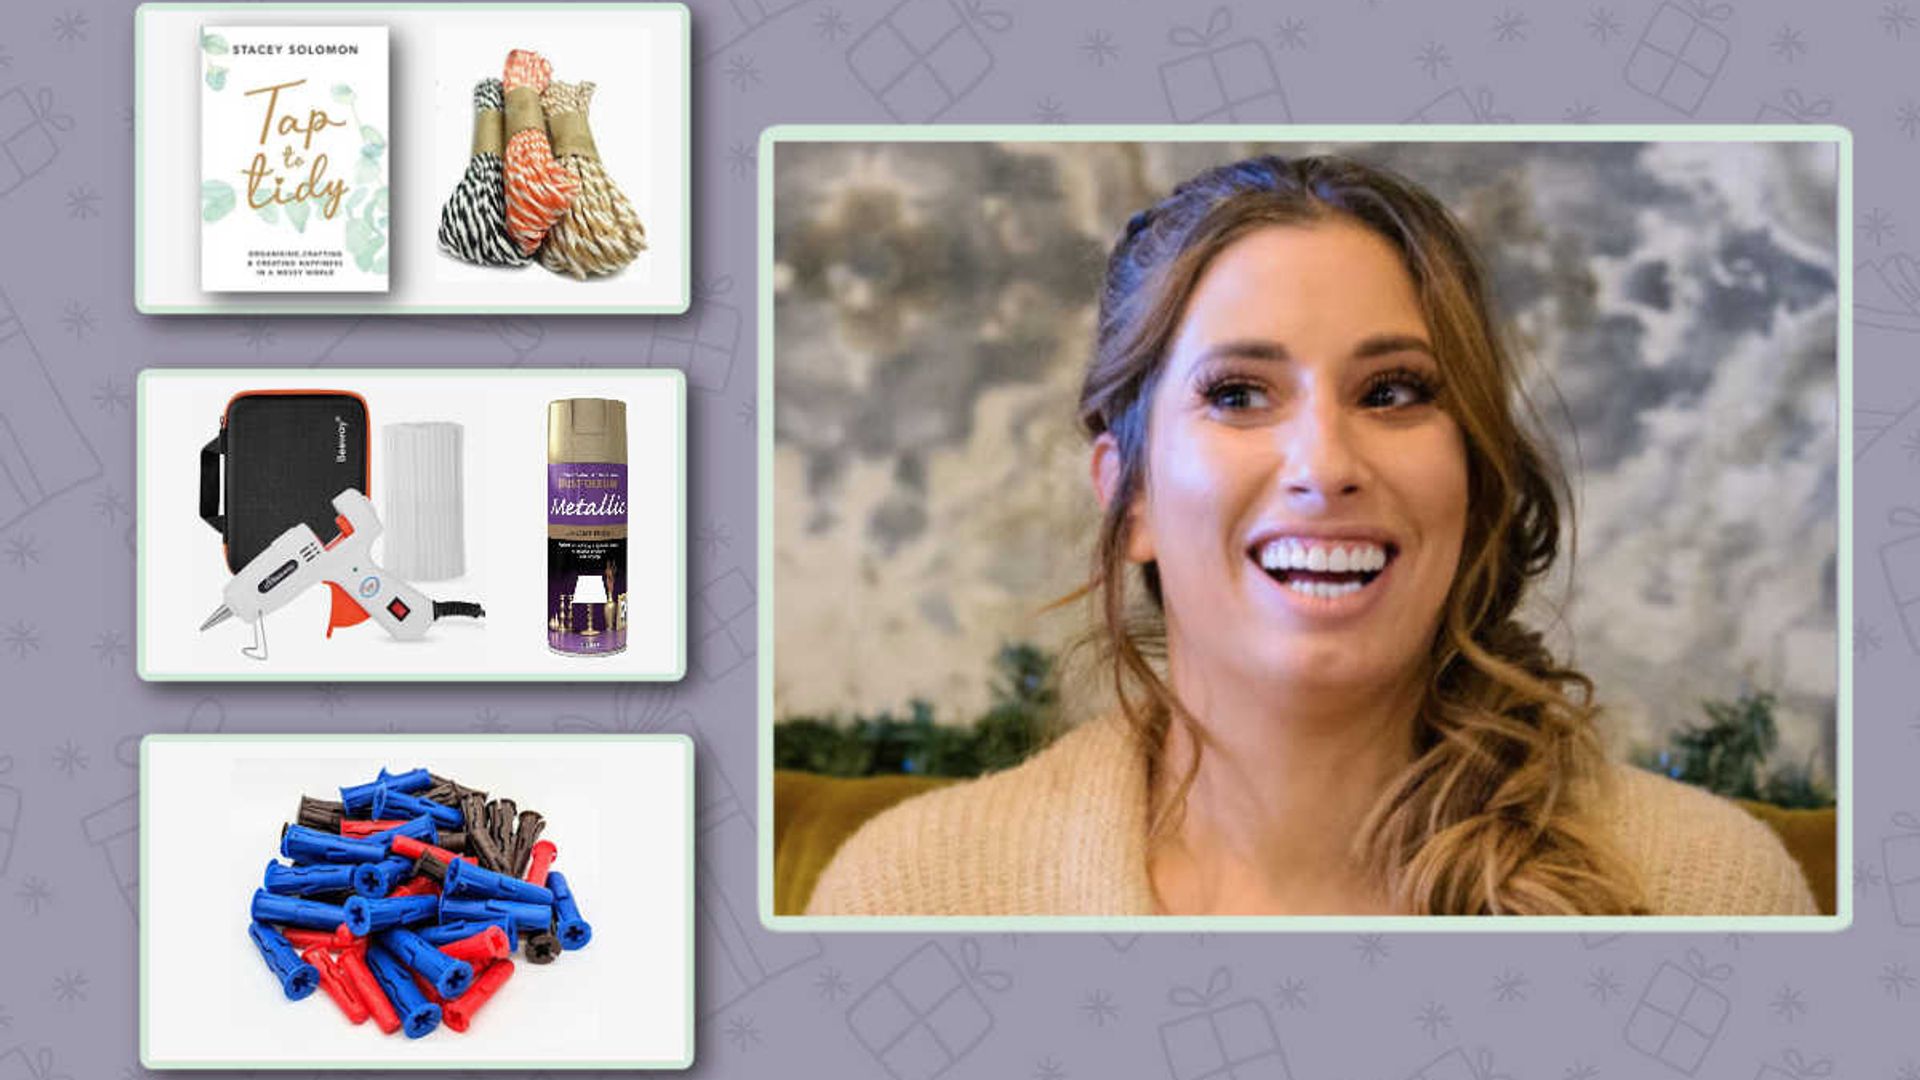 Stacey Solomon amazes us with her DIY skills – and she just revealed what's in her tool kit